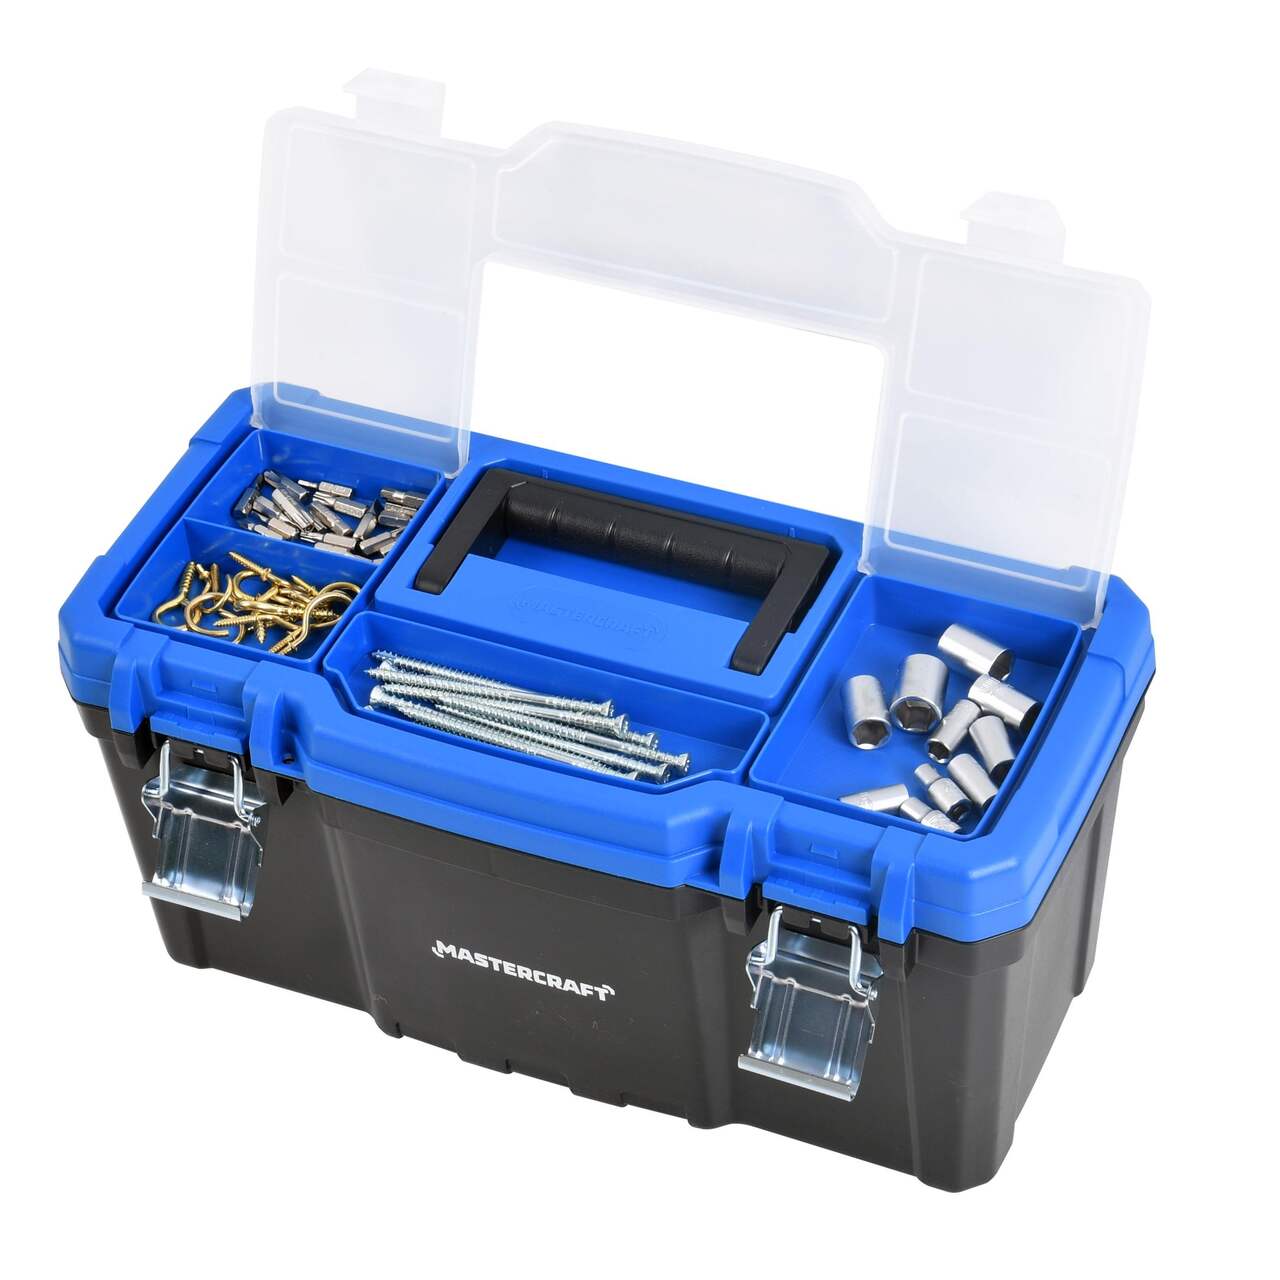 Mastercraft Portable Plastic Tool Box w/ Removable Tray & Tray Top, Blue,  19-in